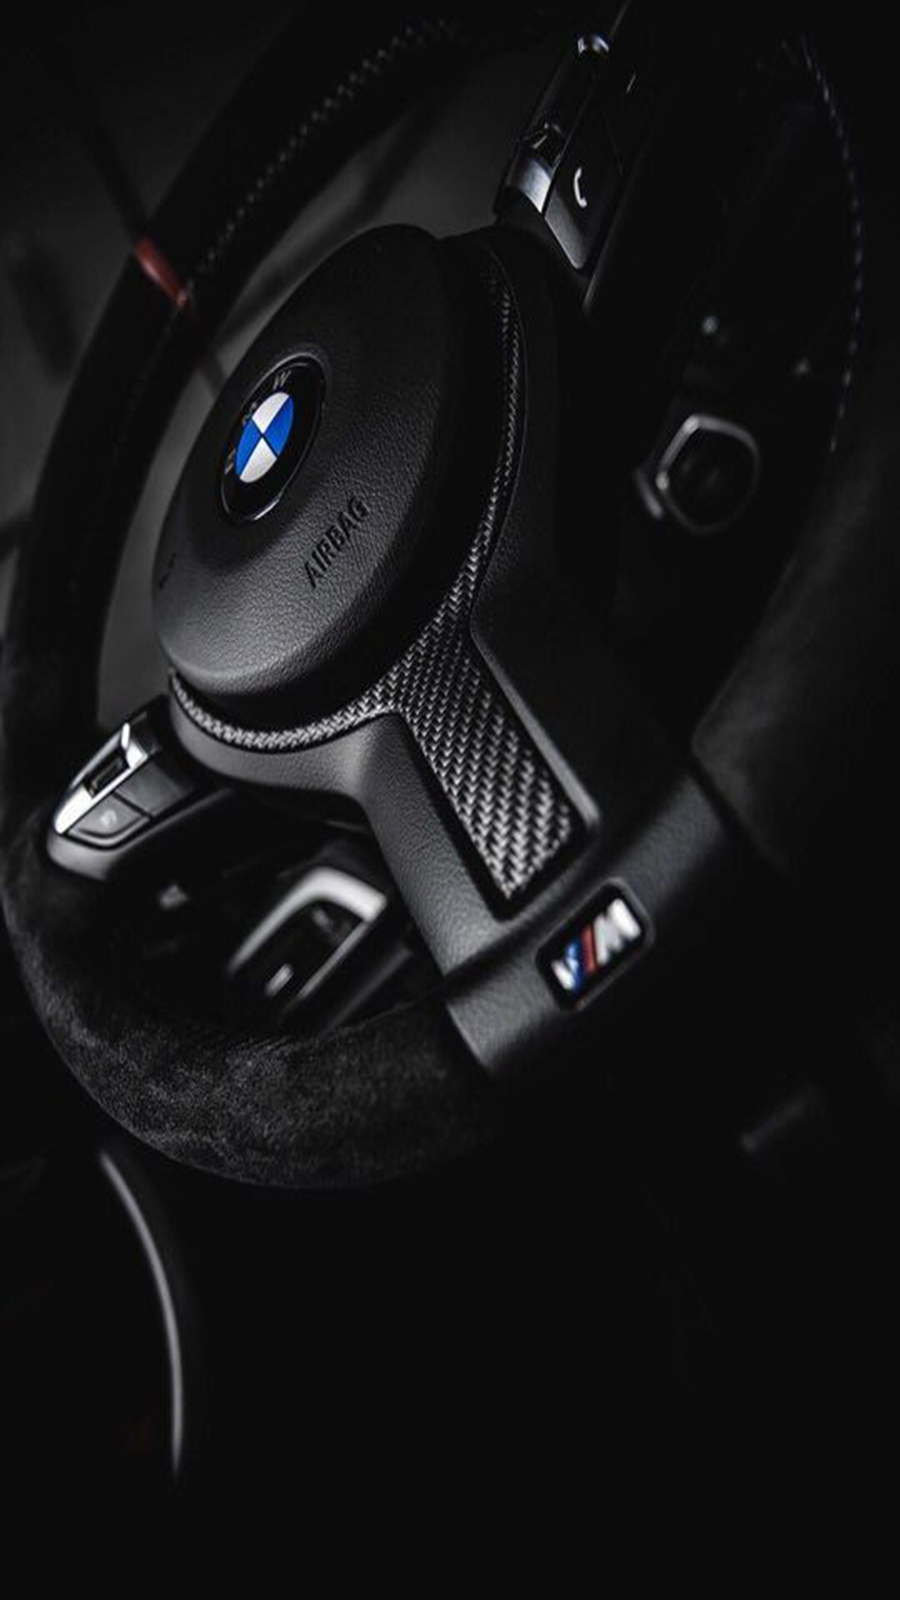 Best Bmw HD wallpapers download – Free Bmw HD Wallpapers (9)